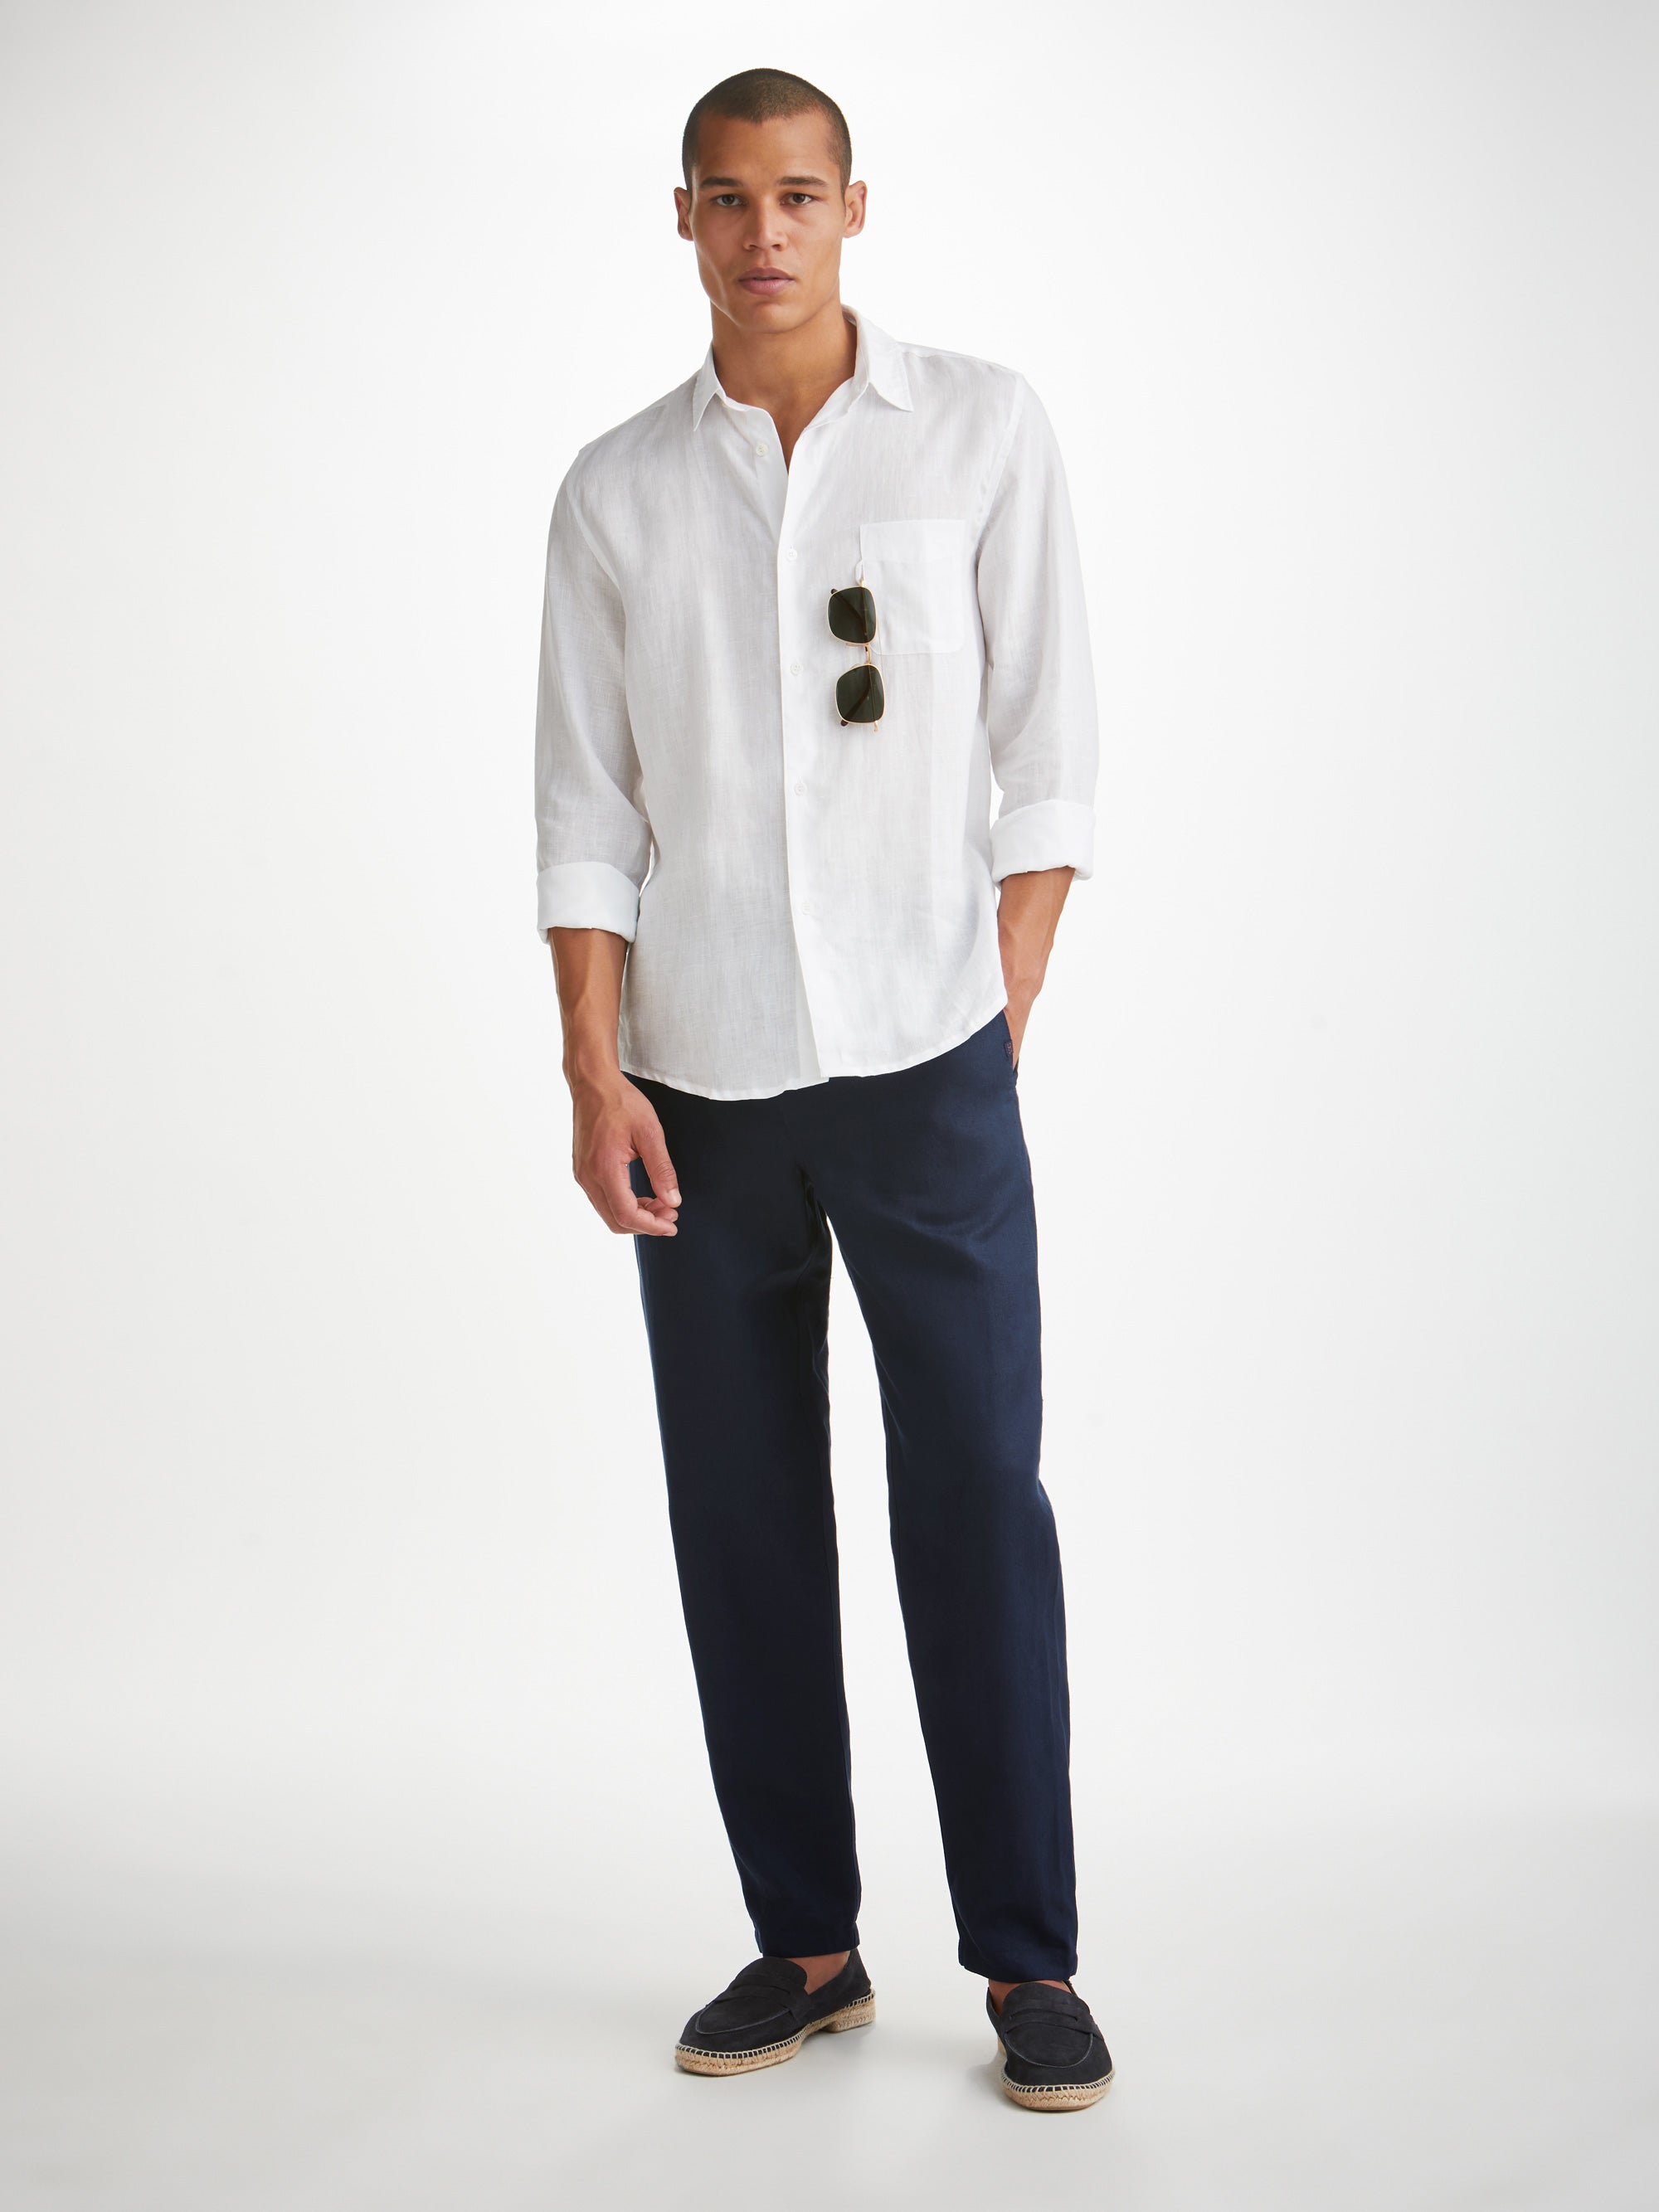 The Best Linen Pants for Men in 2020 - Summer Casual | Mens linen pants, Linen  trousers for men, Linen pants outfit